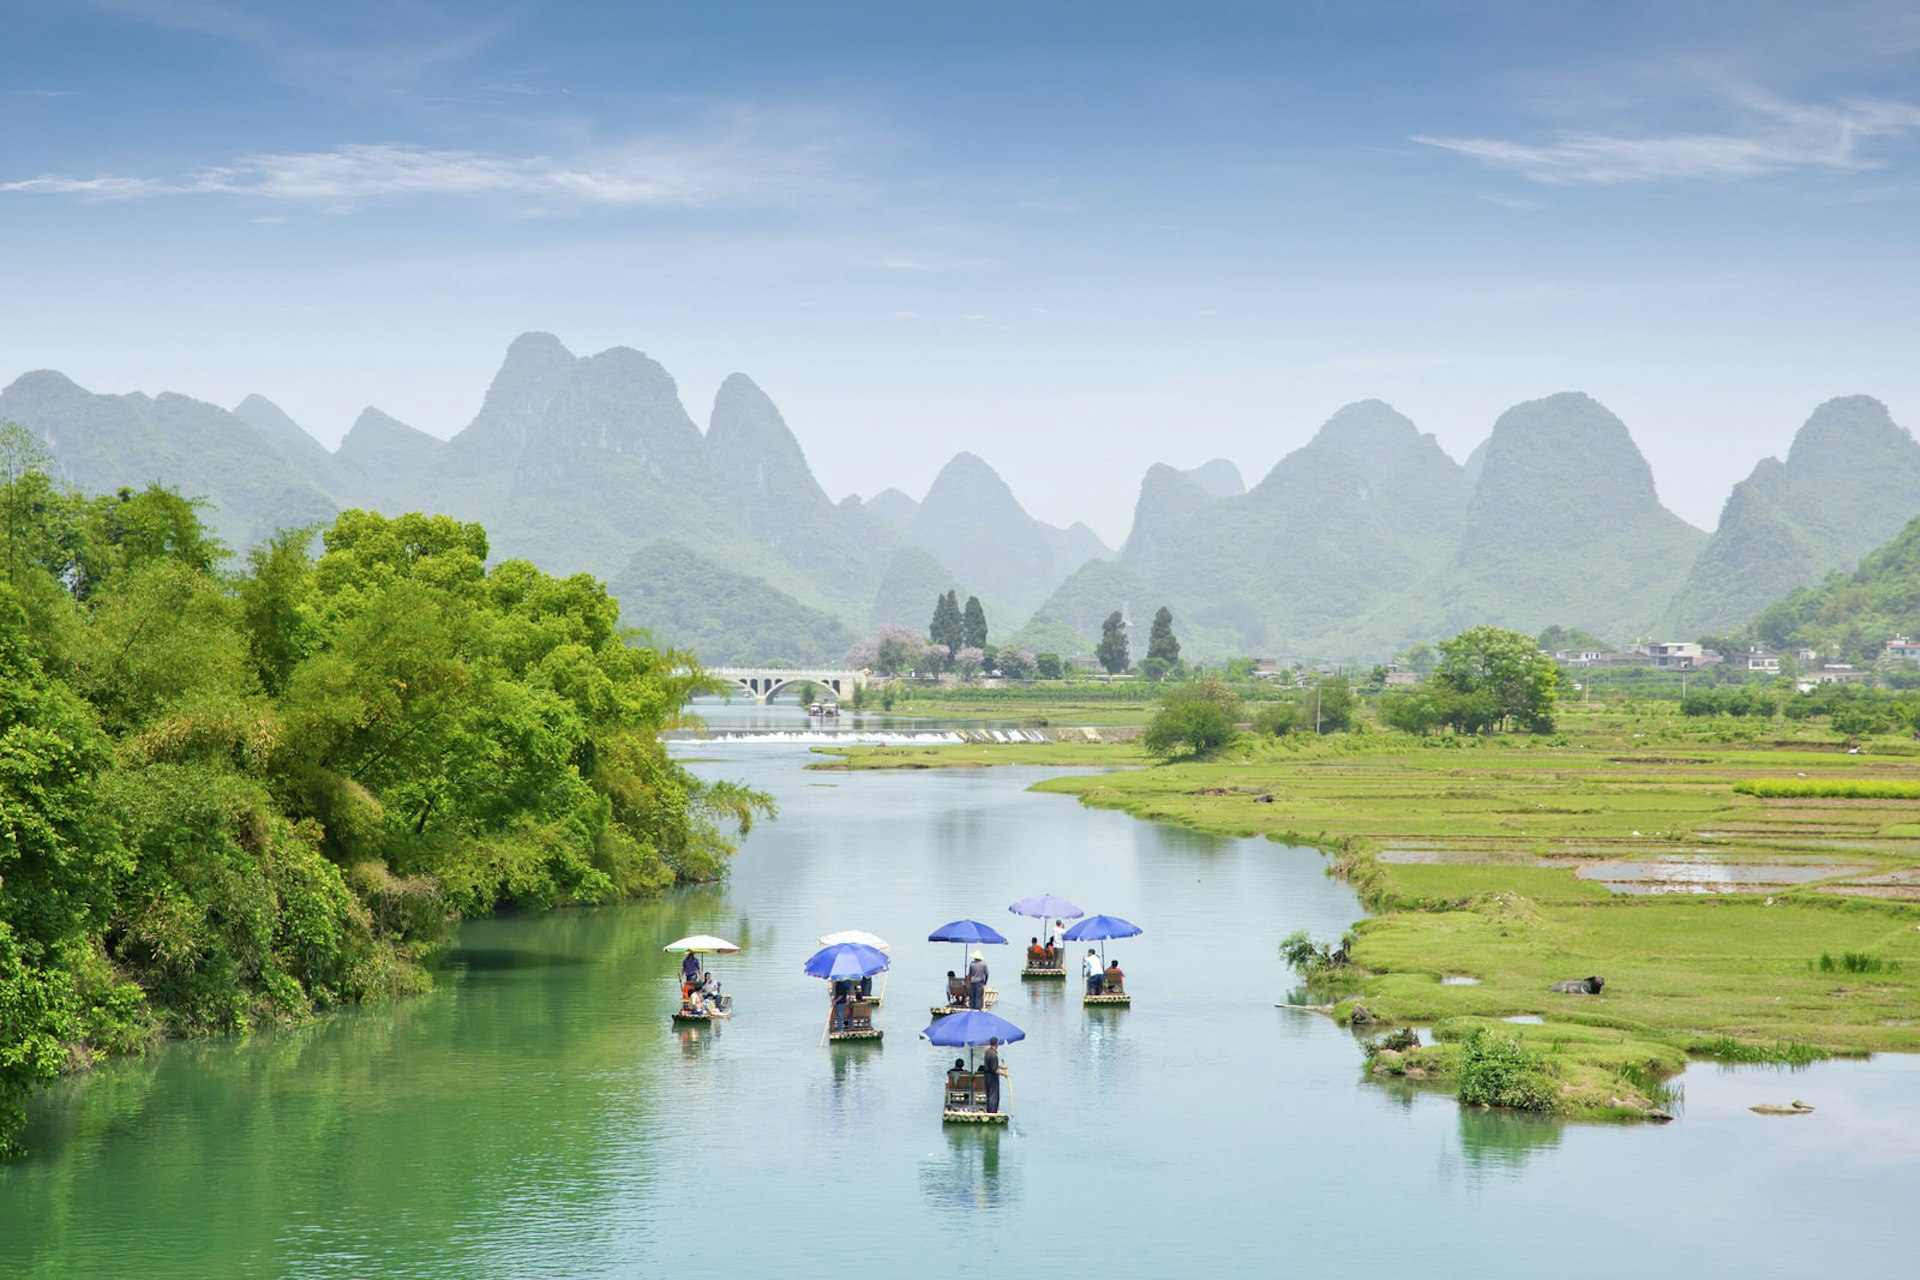 A collection of small boats glide across the river near Guilin. In the distance you can see a range of grass-covered mountains